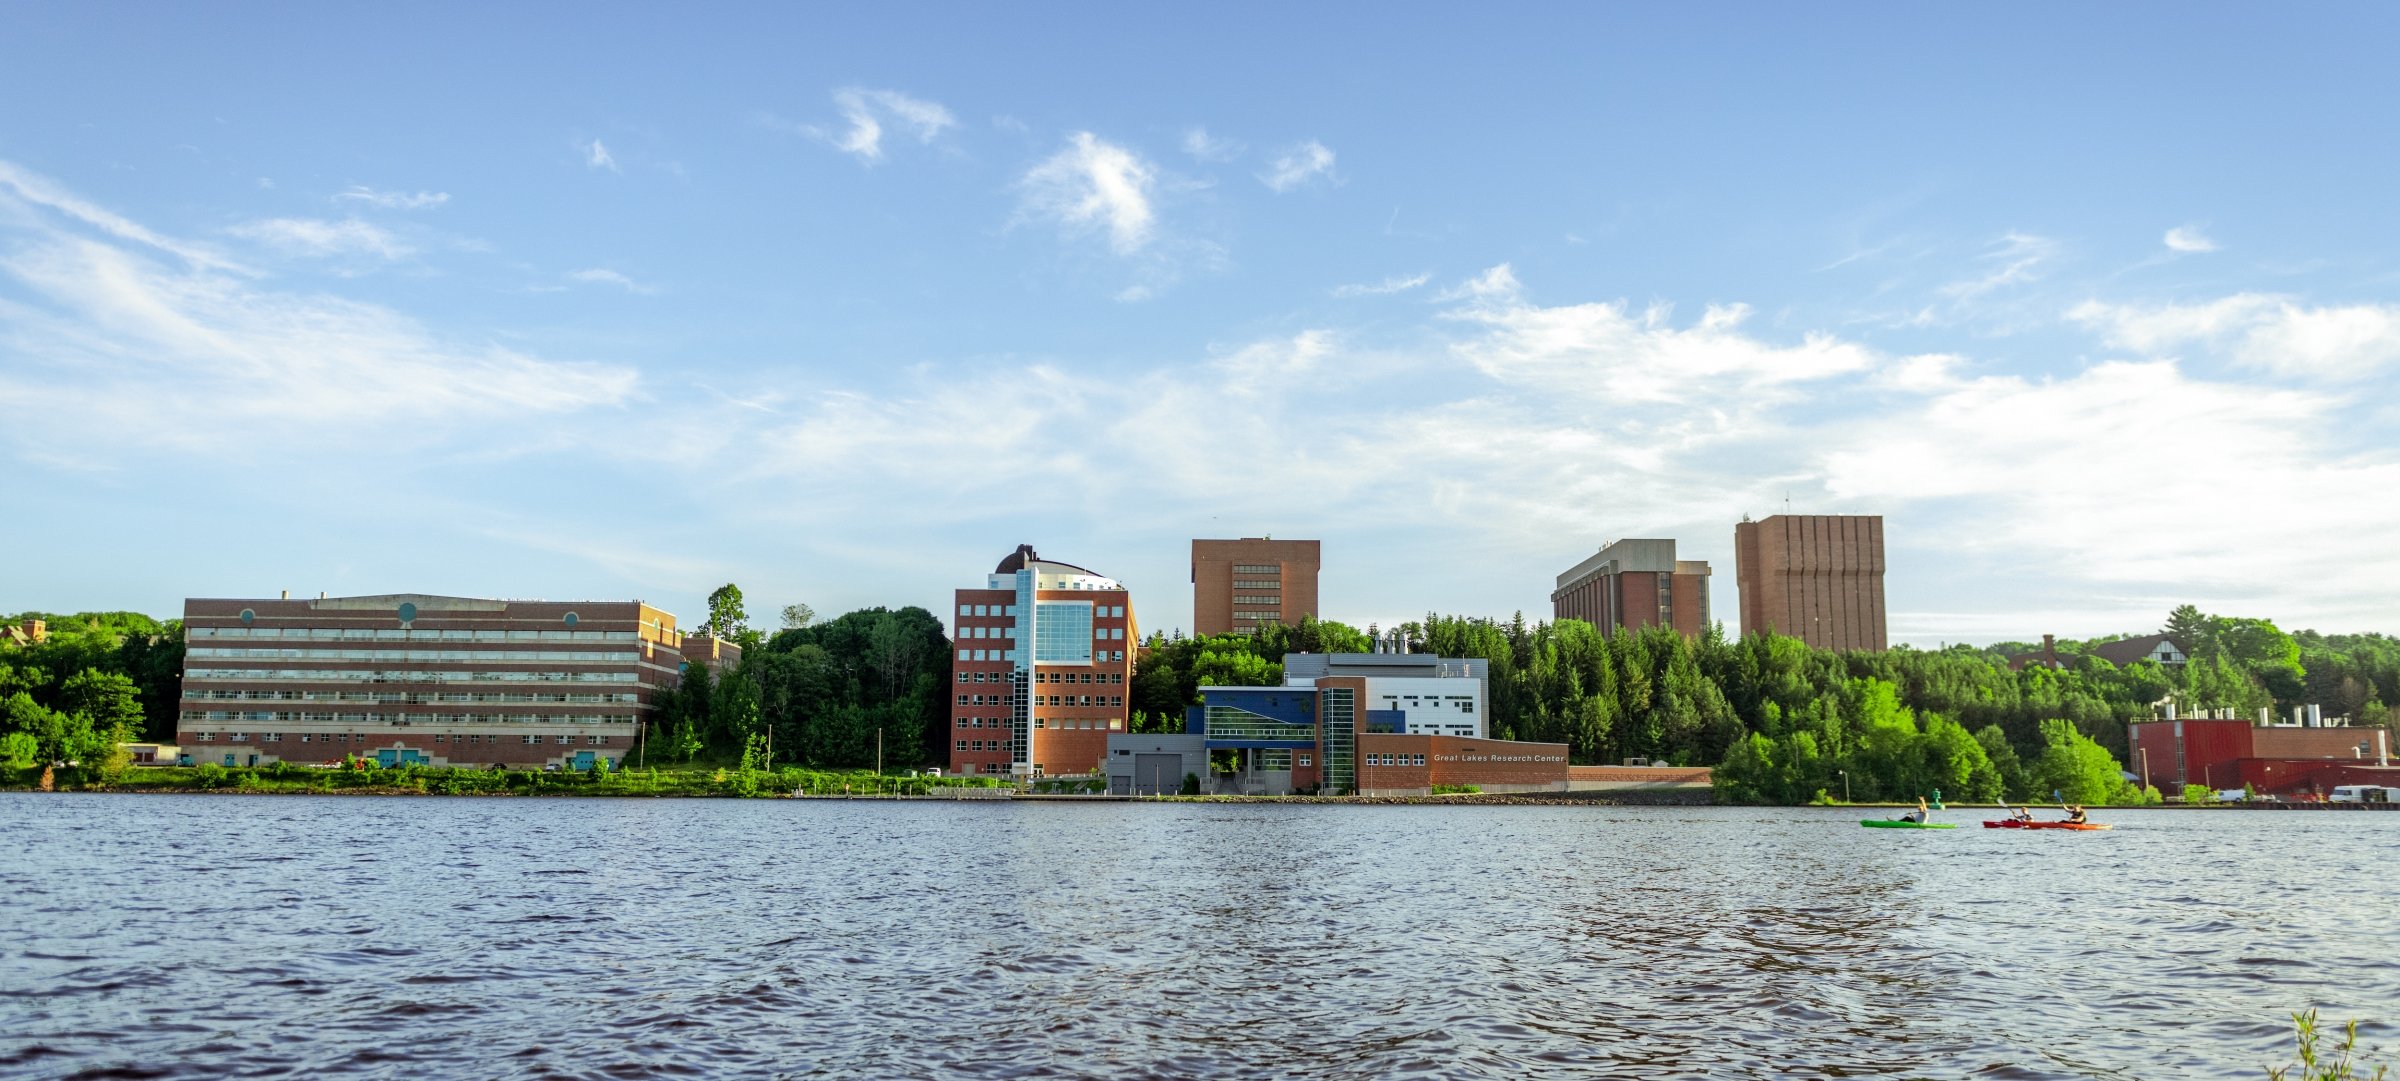 A view of campus from across the waterway.